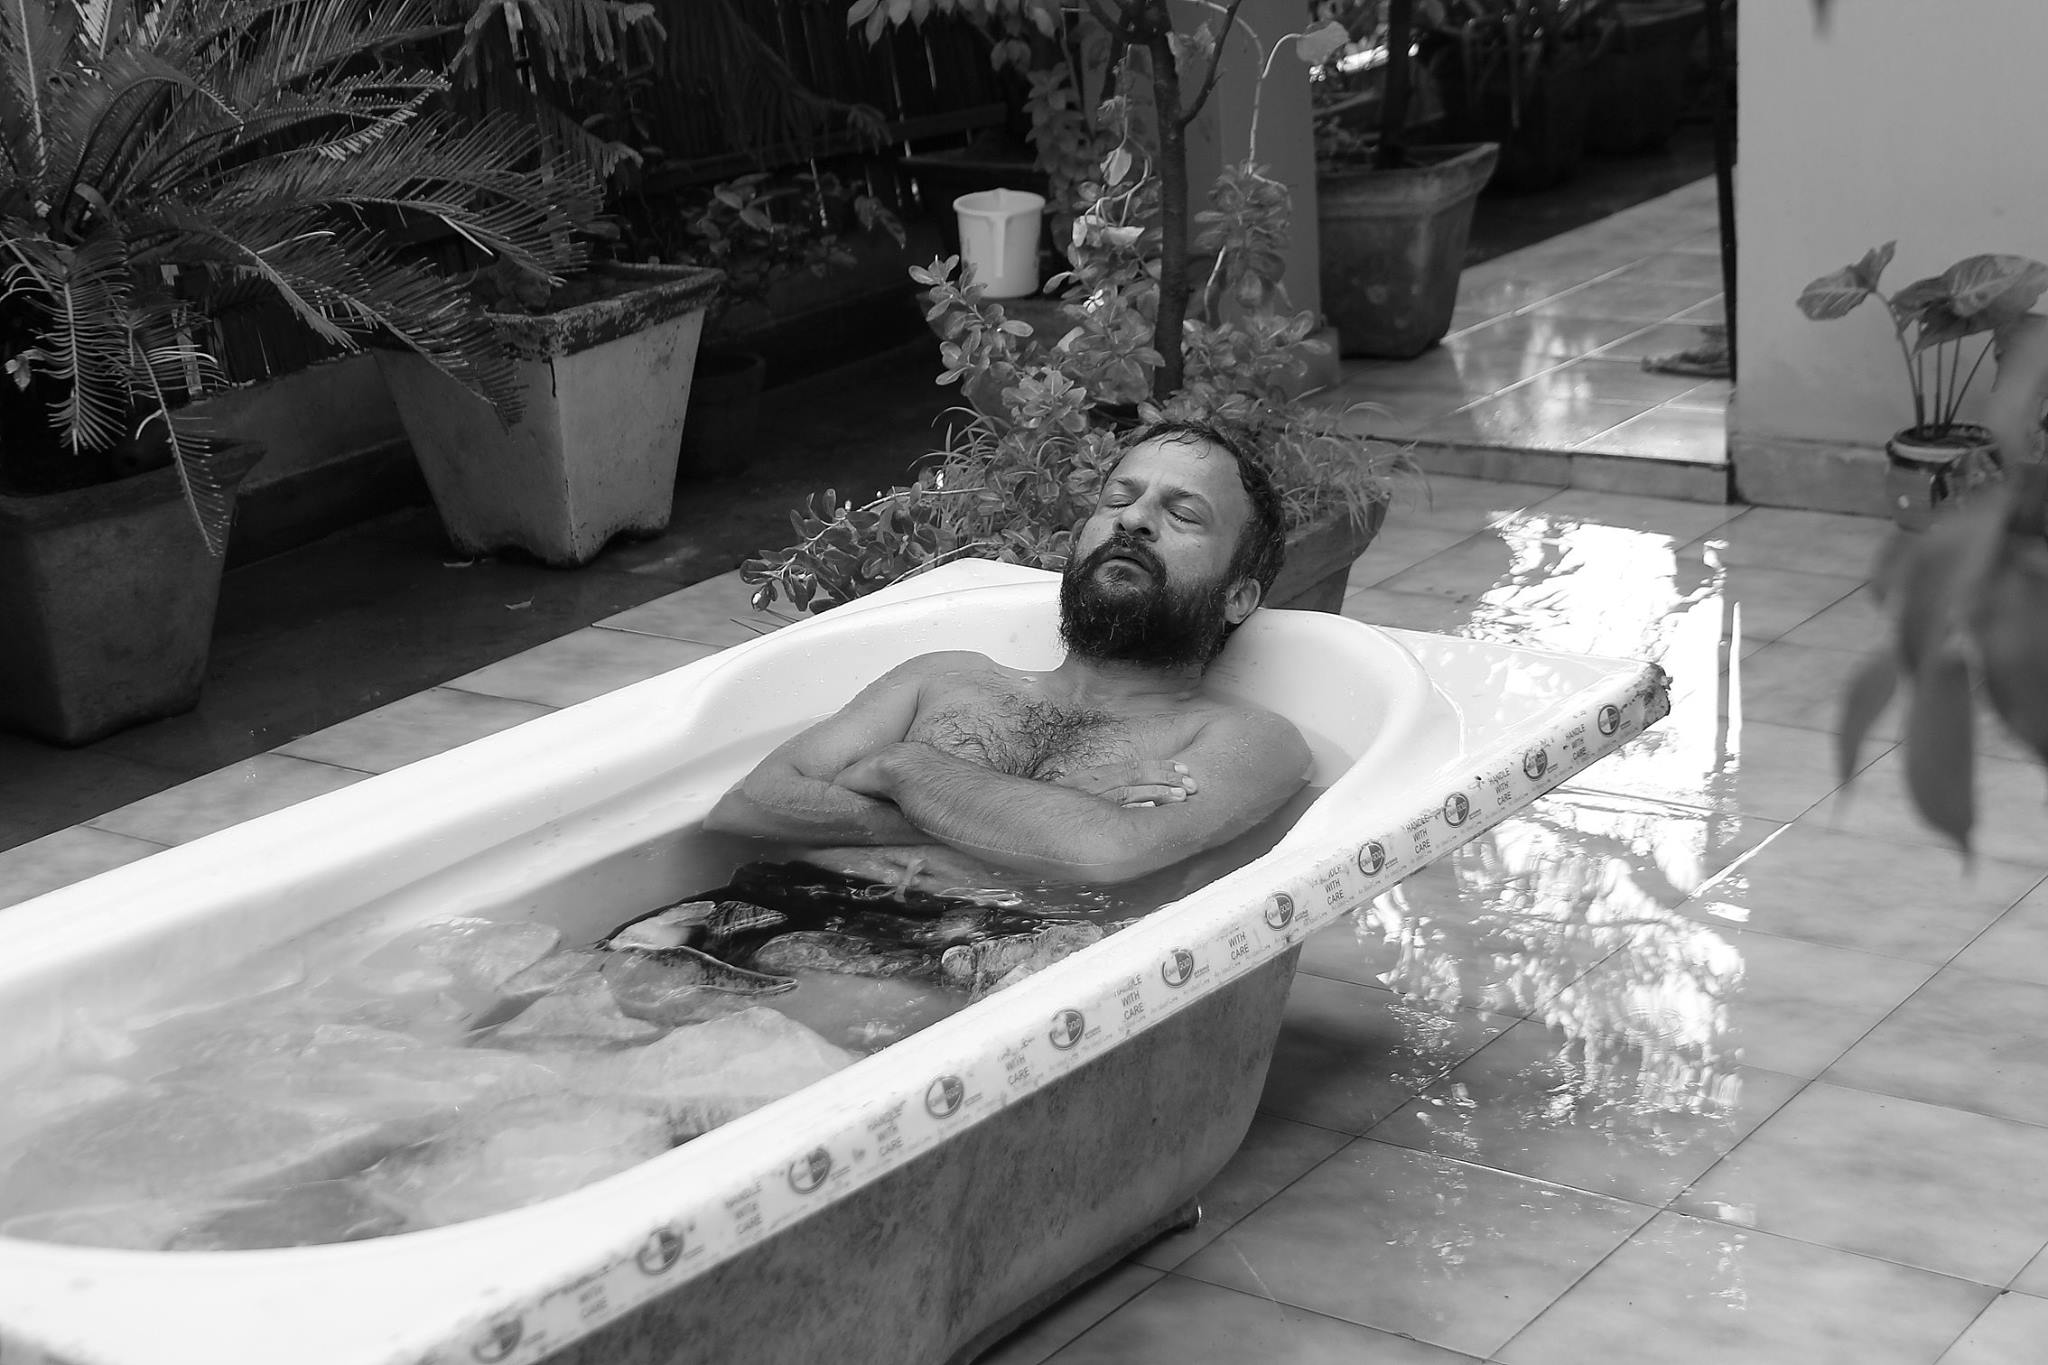 Mohit in a tub of cold water with ice slabs in New Delhi in June. The temperature outside was 45C